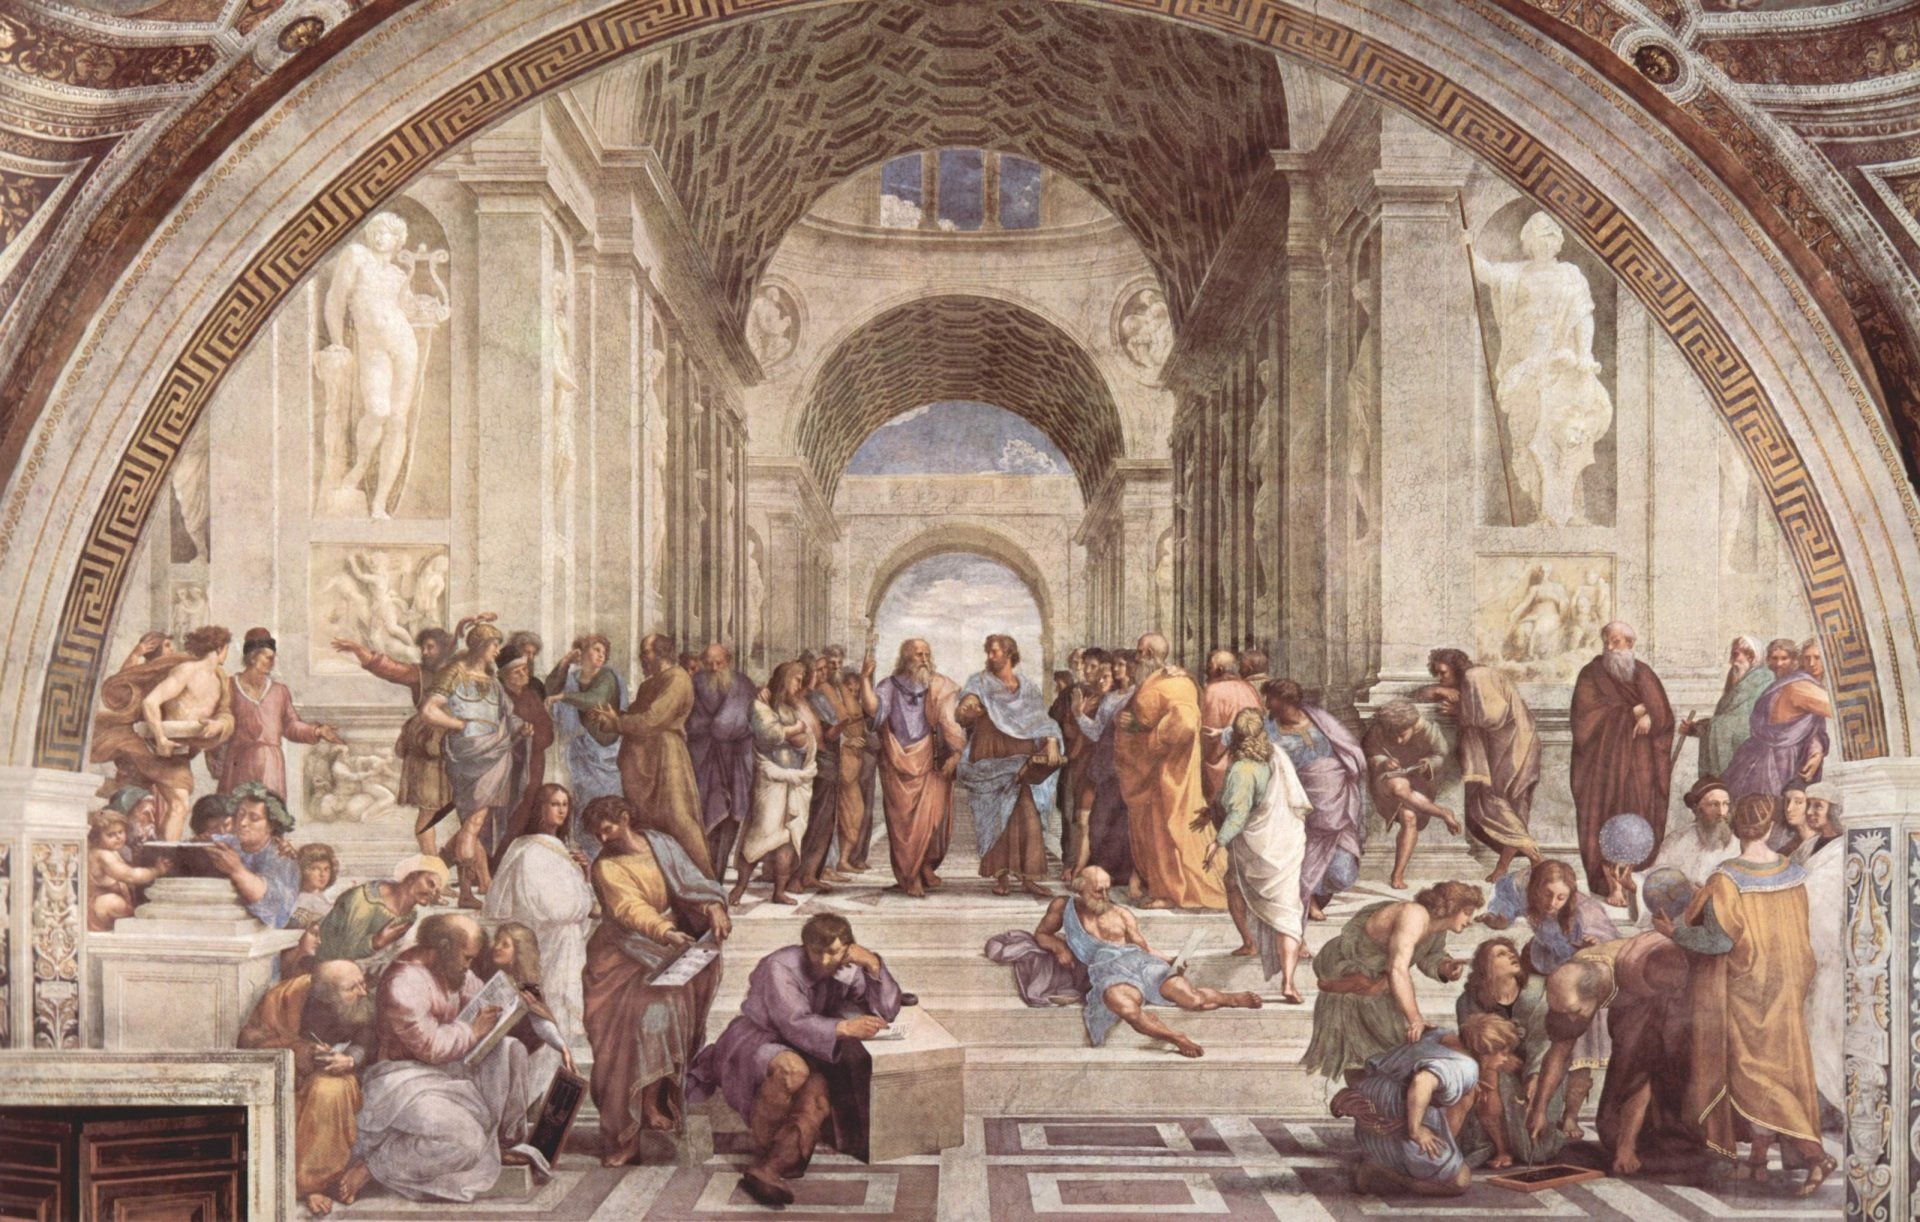 A large painting of a group of people in a building